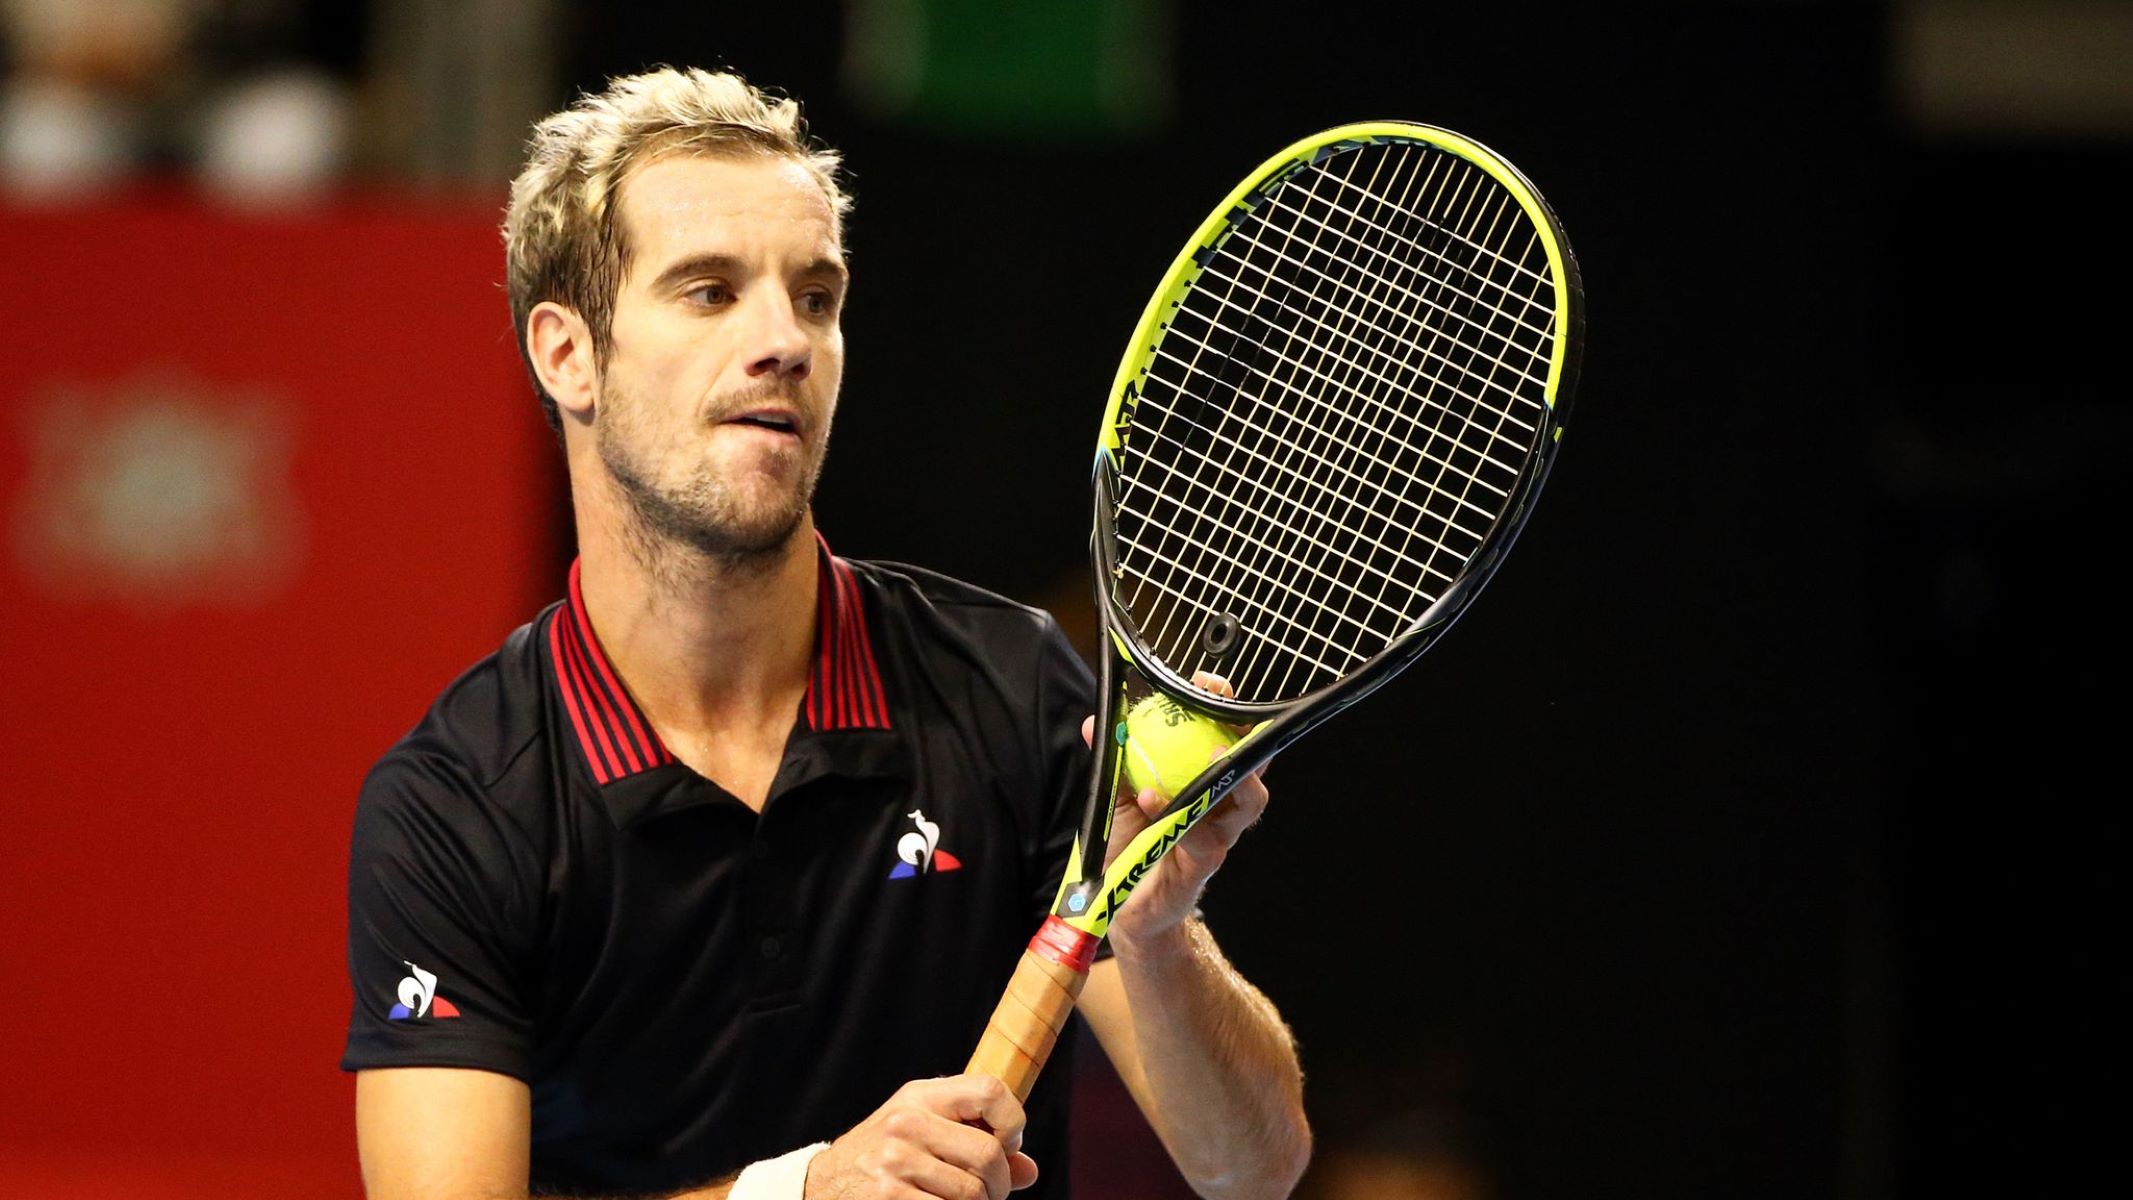 18 Enigmatic Facts About Richard Gasquet